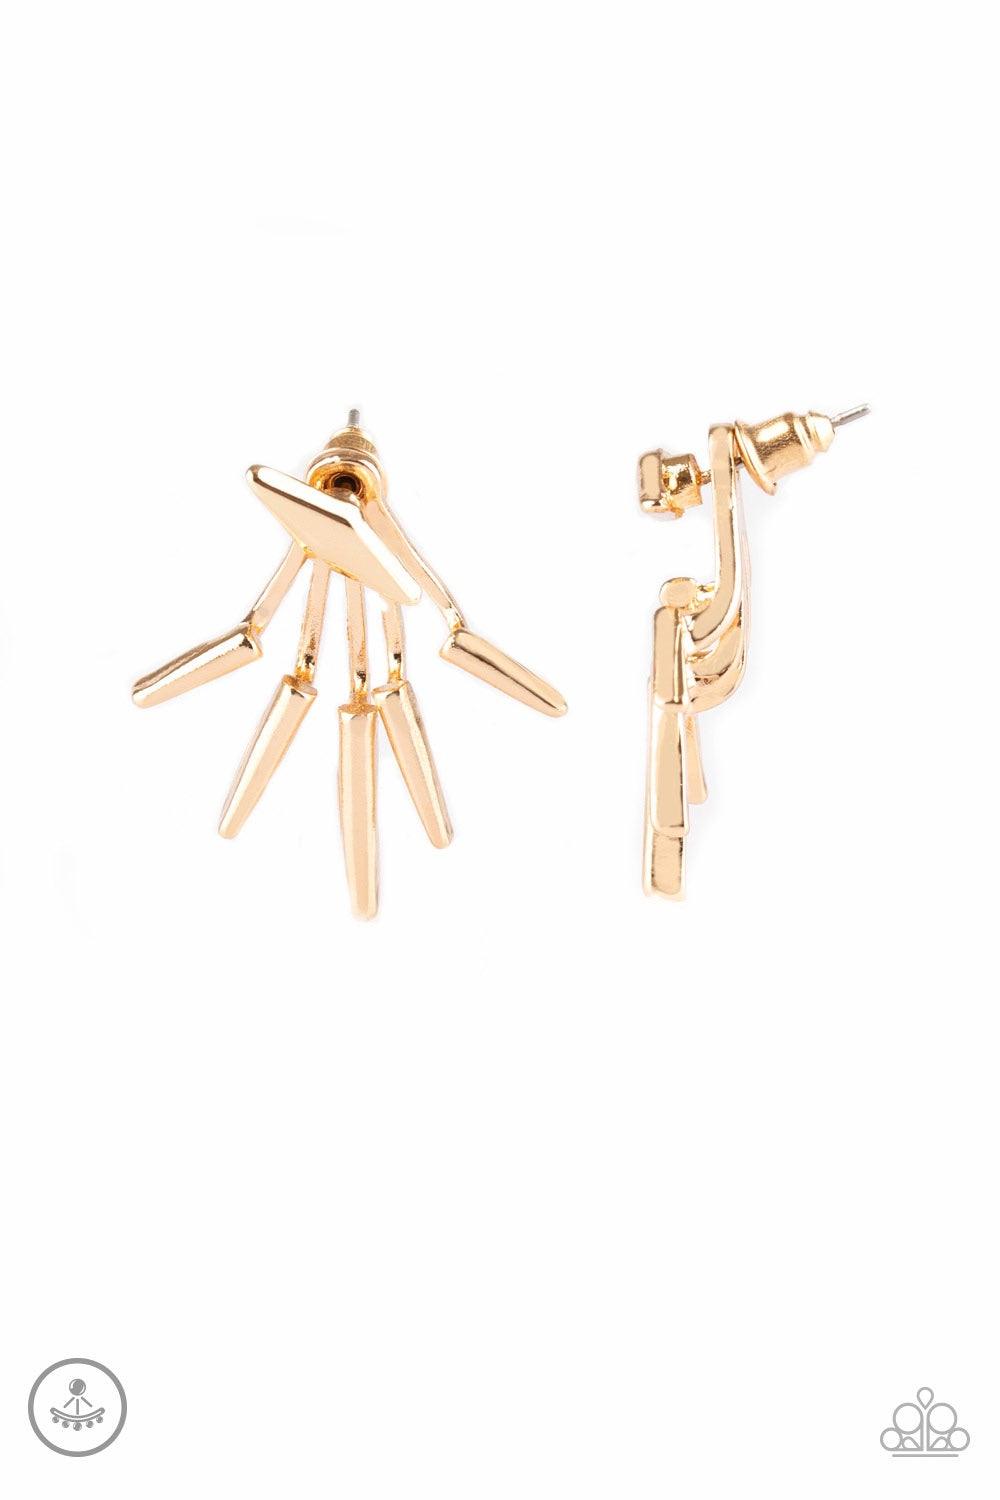 Paparazzi Accessories Extra Electric - Gold A gold diamond-shape frame attaches to a double-sided post, designed to fasten behind the ear. Radiating with matching gold frames, the double-sided post peeks out beneath the ear, creating an edgy fringe. Earri